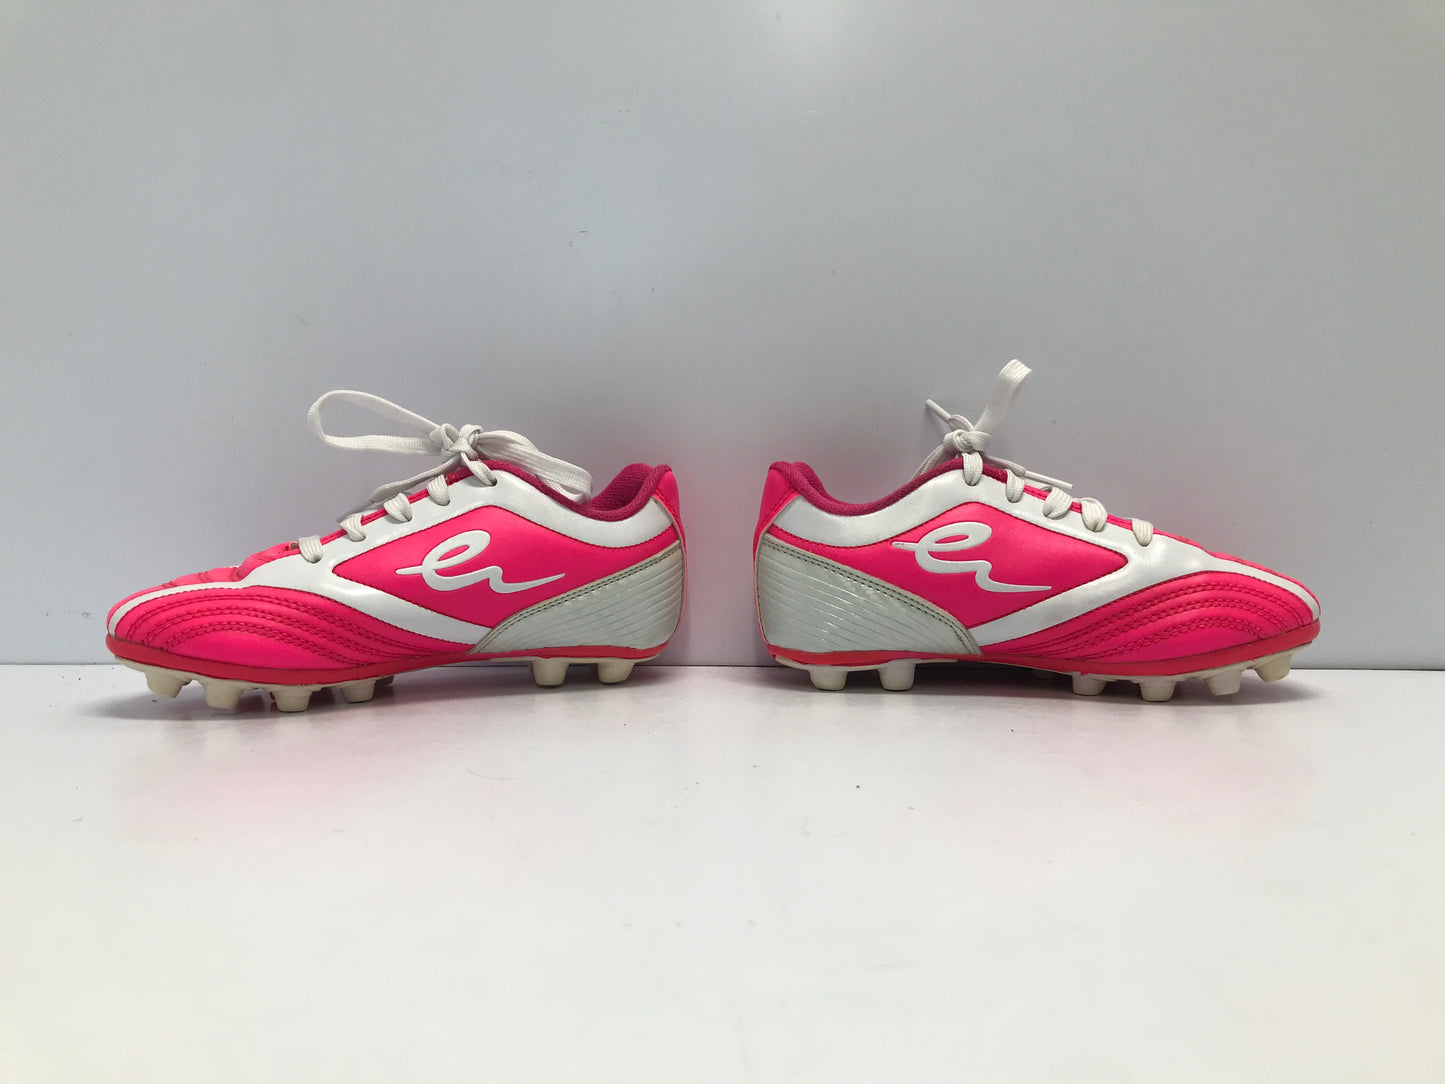 Soccer Shoes Cleats Child Size 1 Eletto Pink White Like New